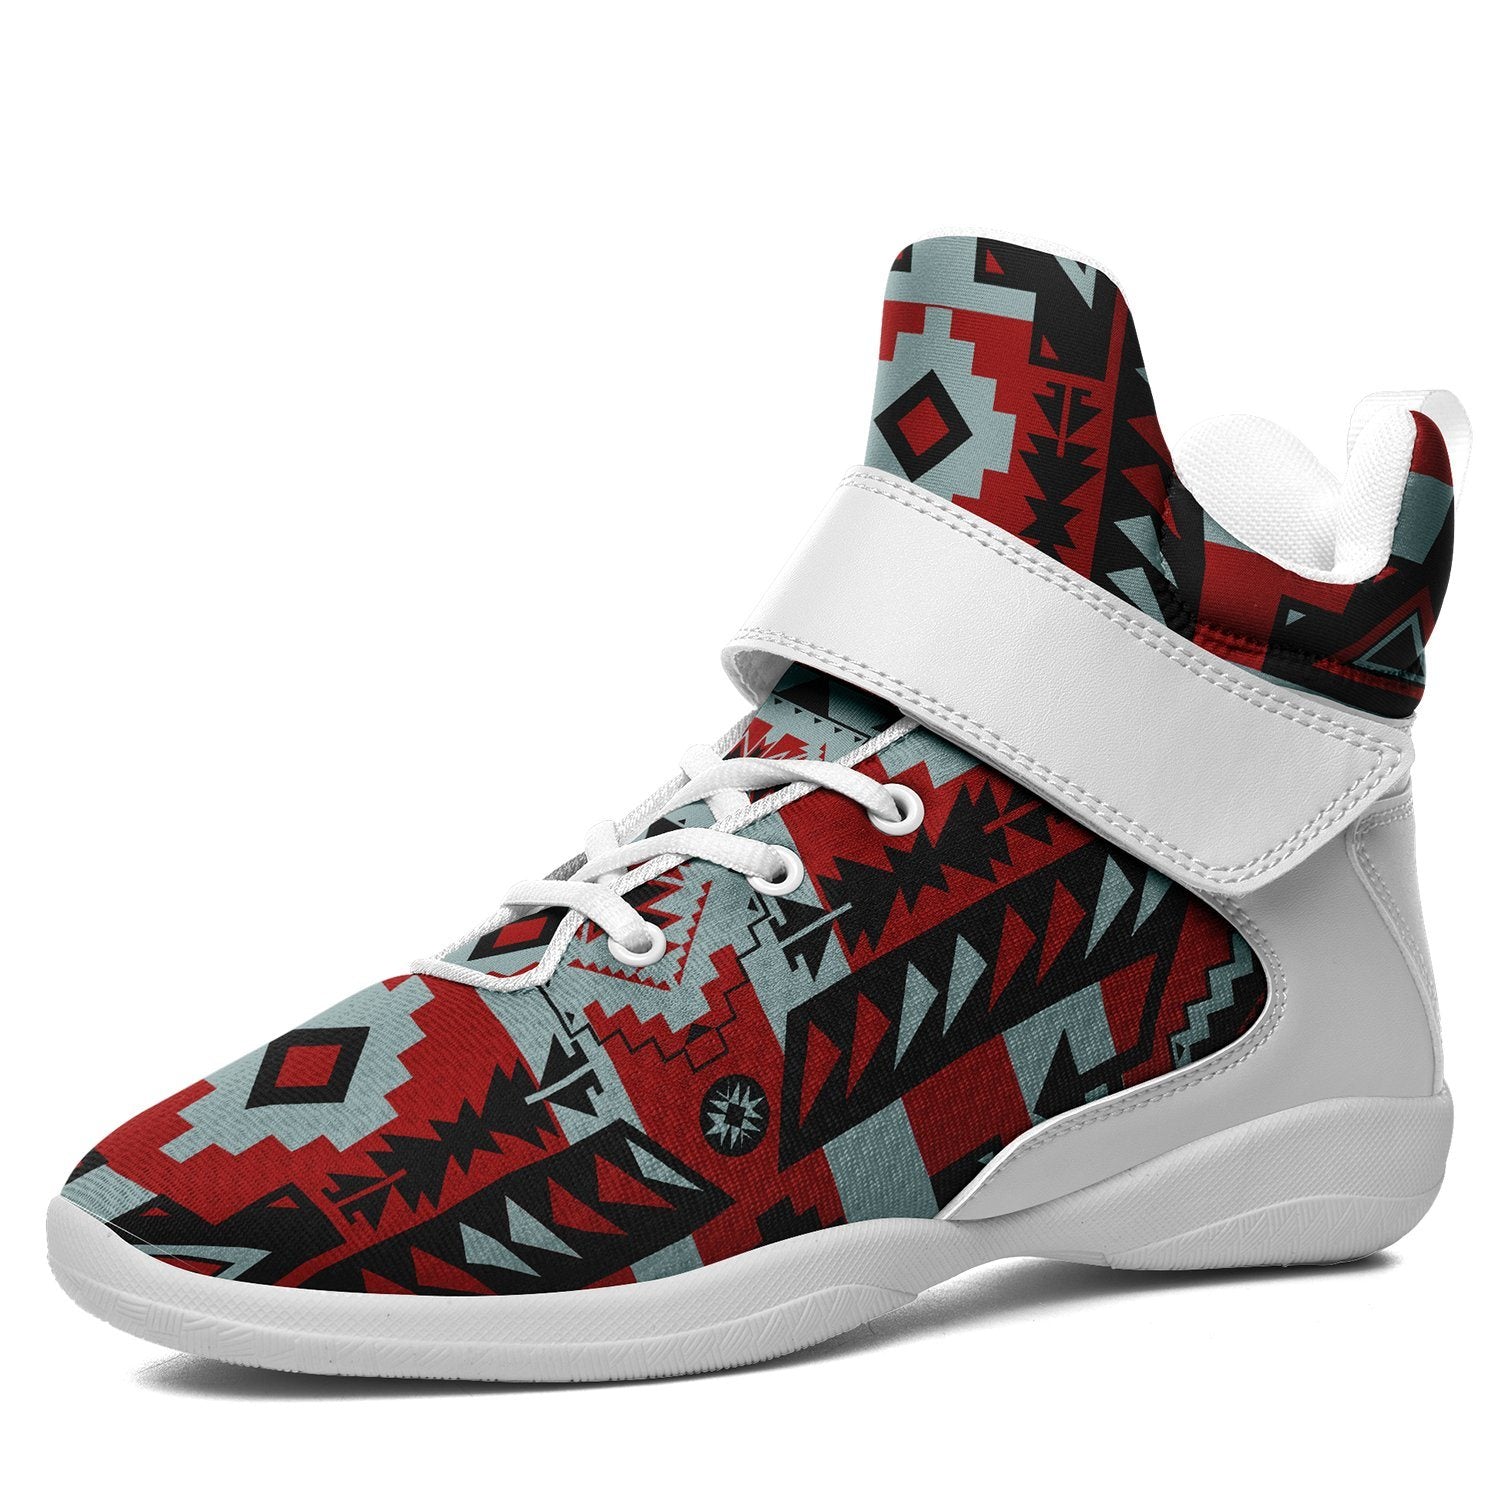 Chiefs Mountain Candy Sierra Dark Ipottaa Basketball / Sport High Top Shoes 49 Dzine US Women 4.5 / US Youth 3.5 / EUR 35 White Sole with White Strap 